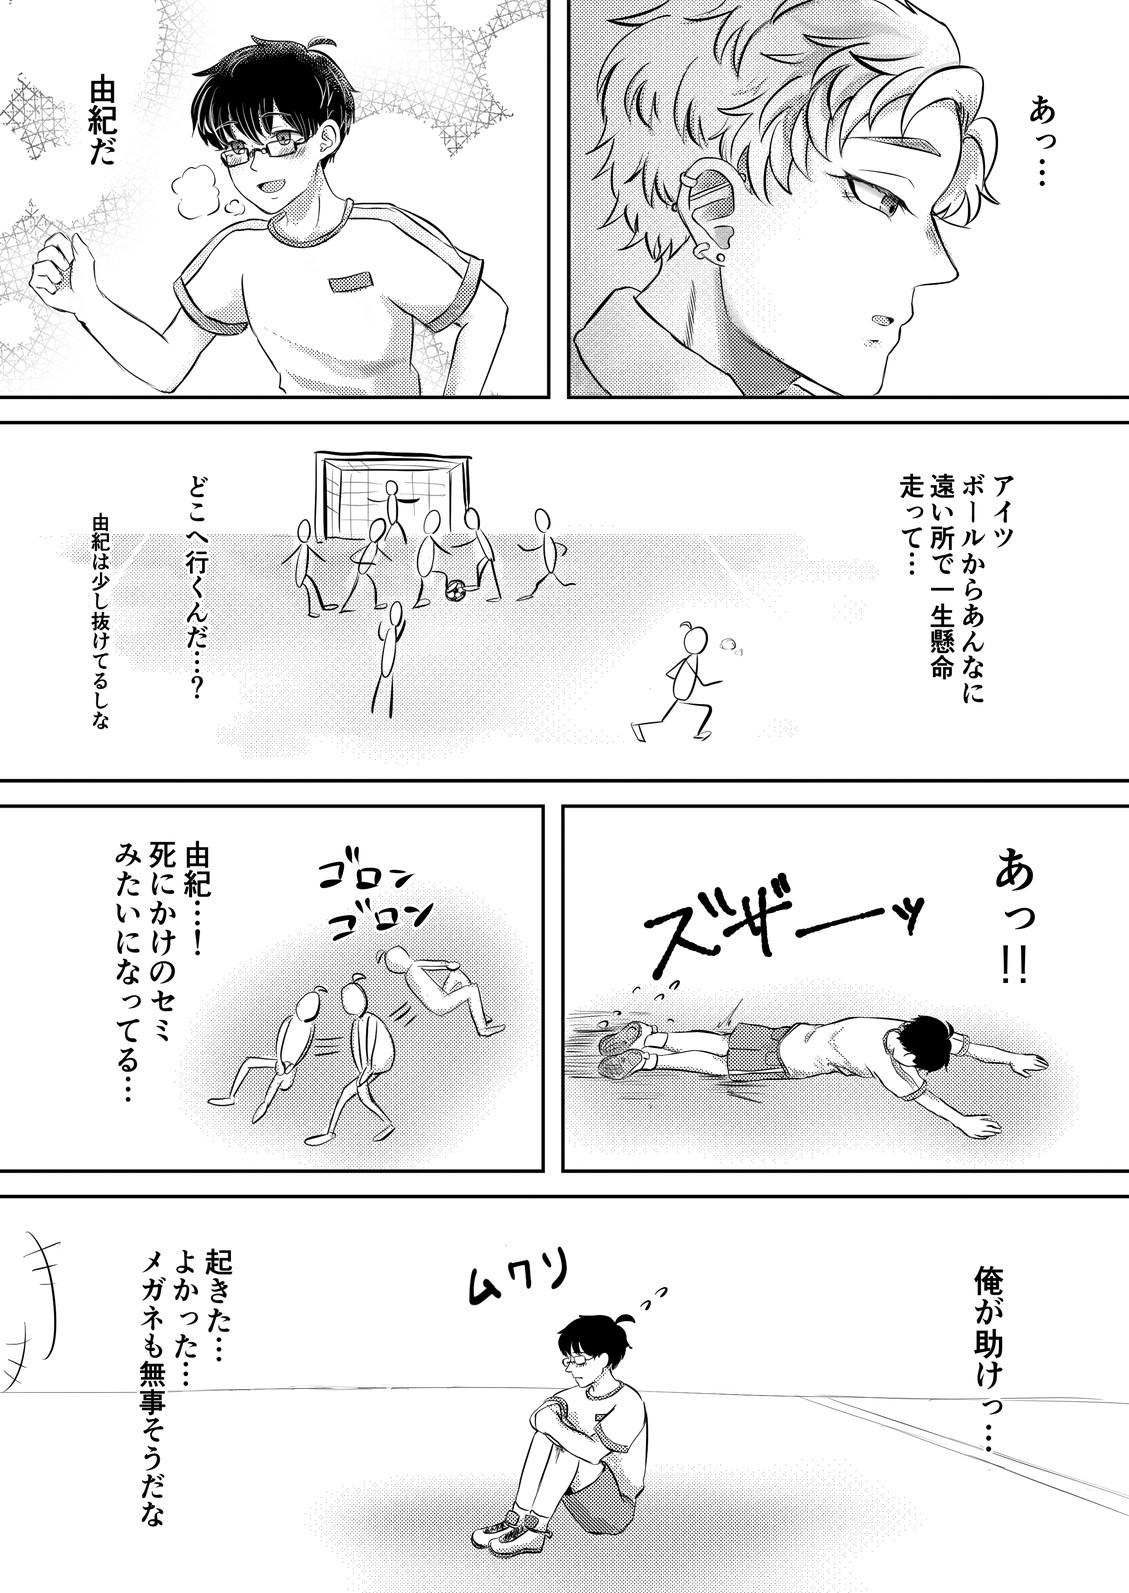 Doggy 龍馬君の特等席 Infiel - Page 6